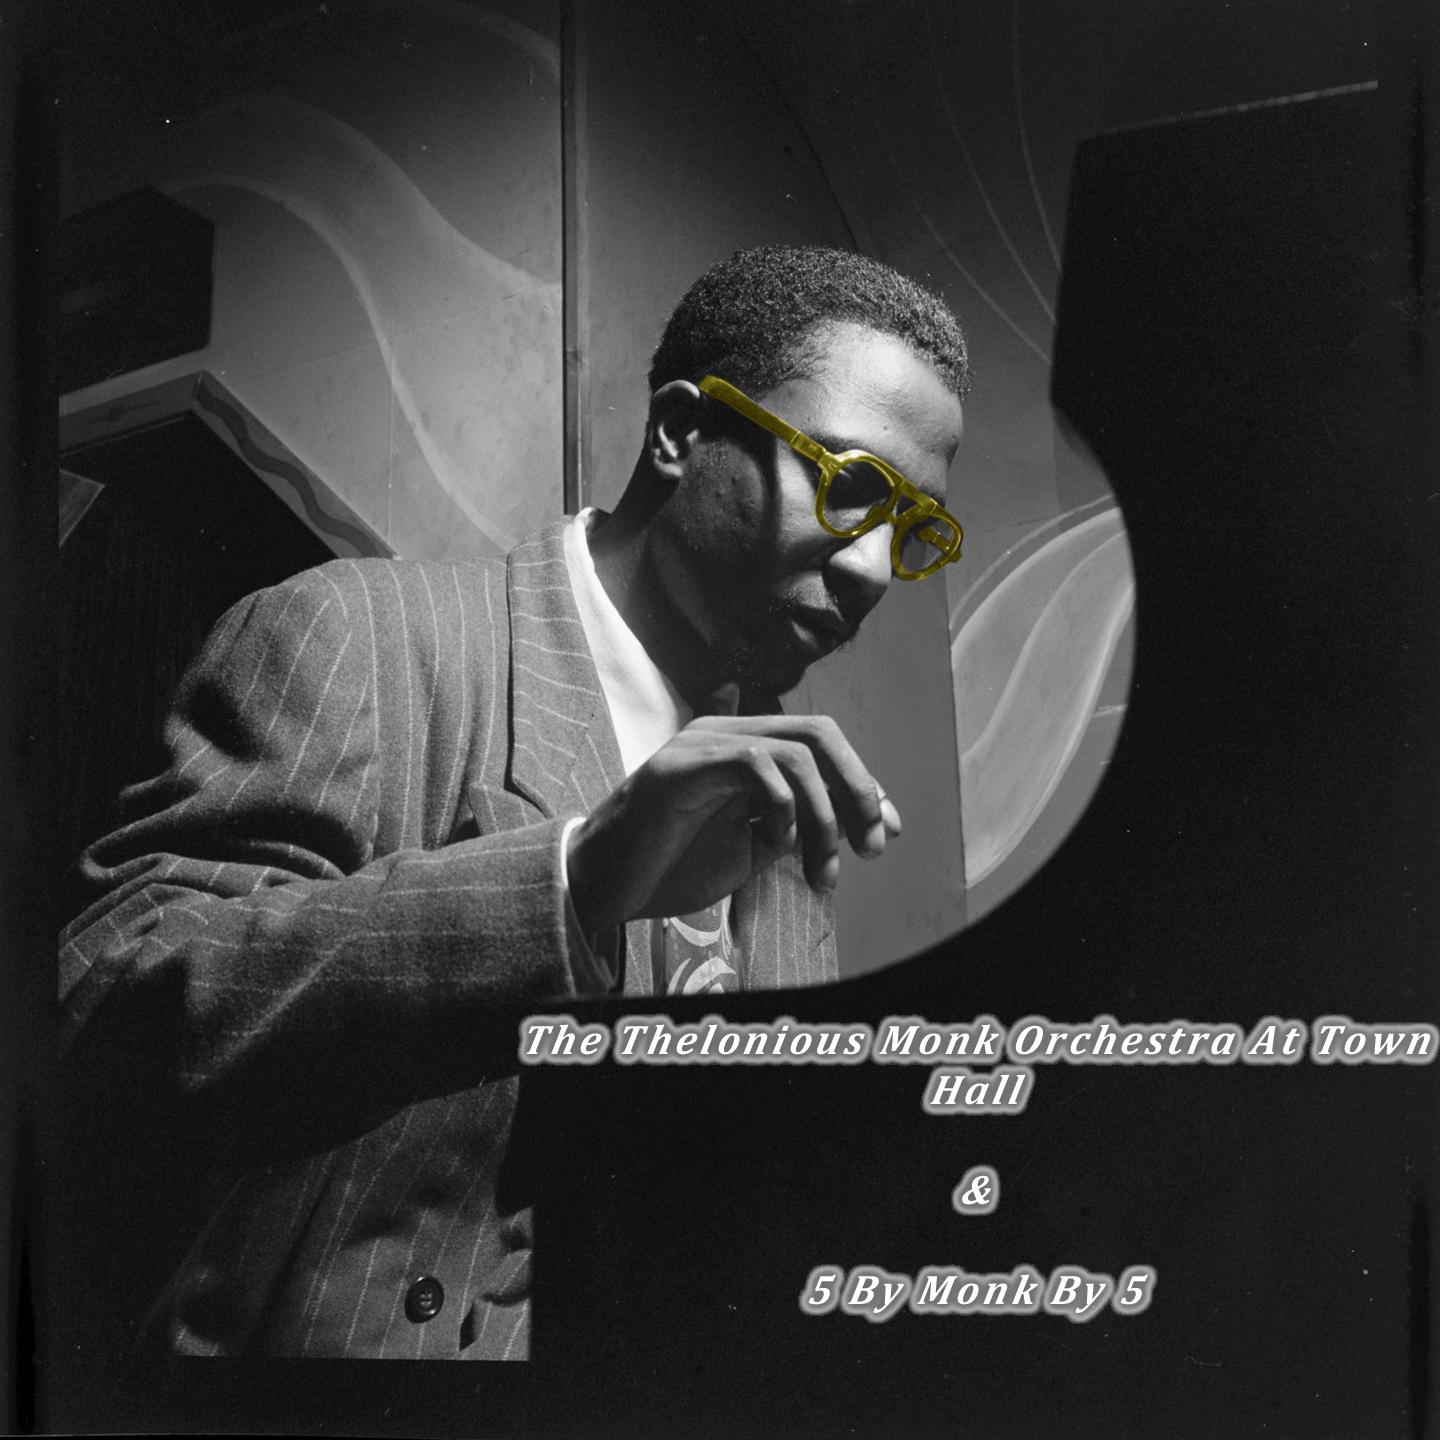 The Thelonious Monk Orchestra at Town Hall & 5 by Monk By 5